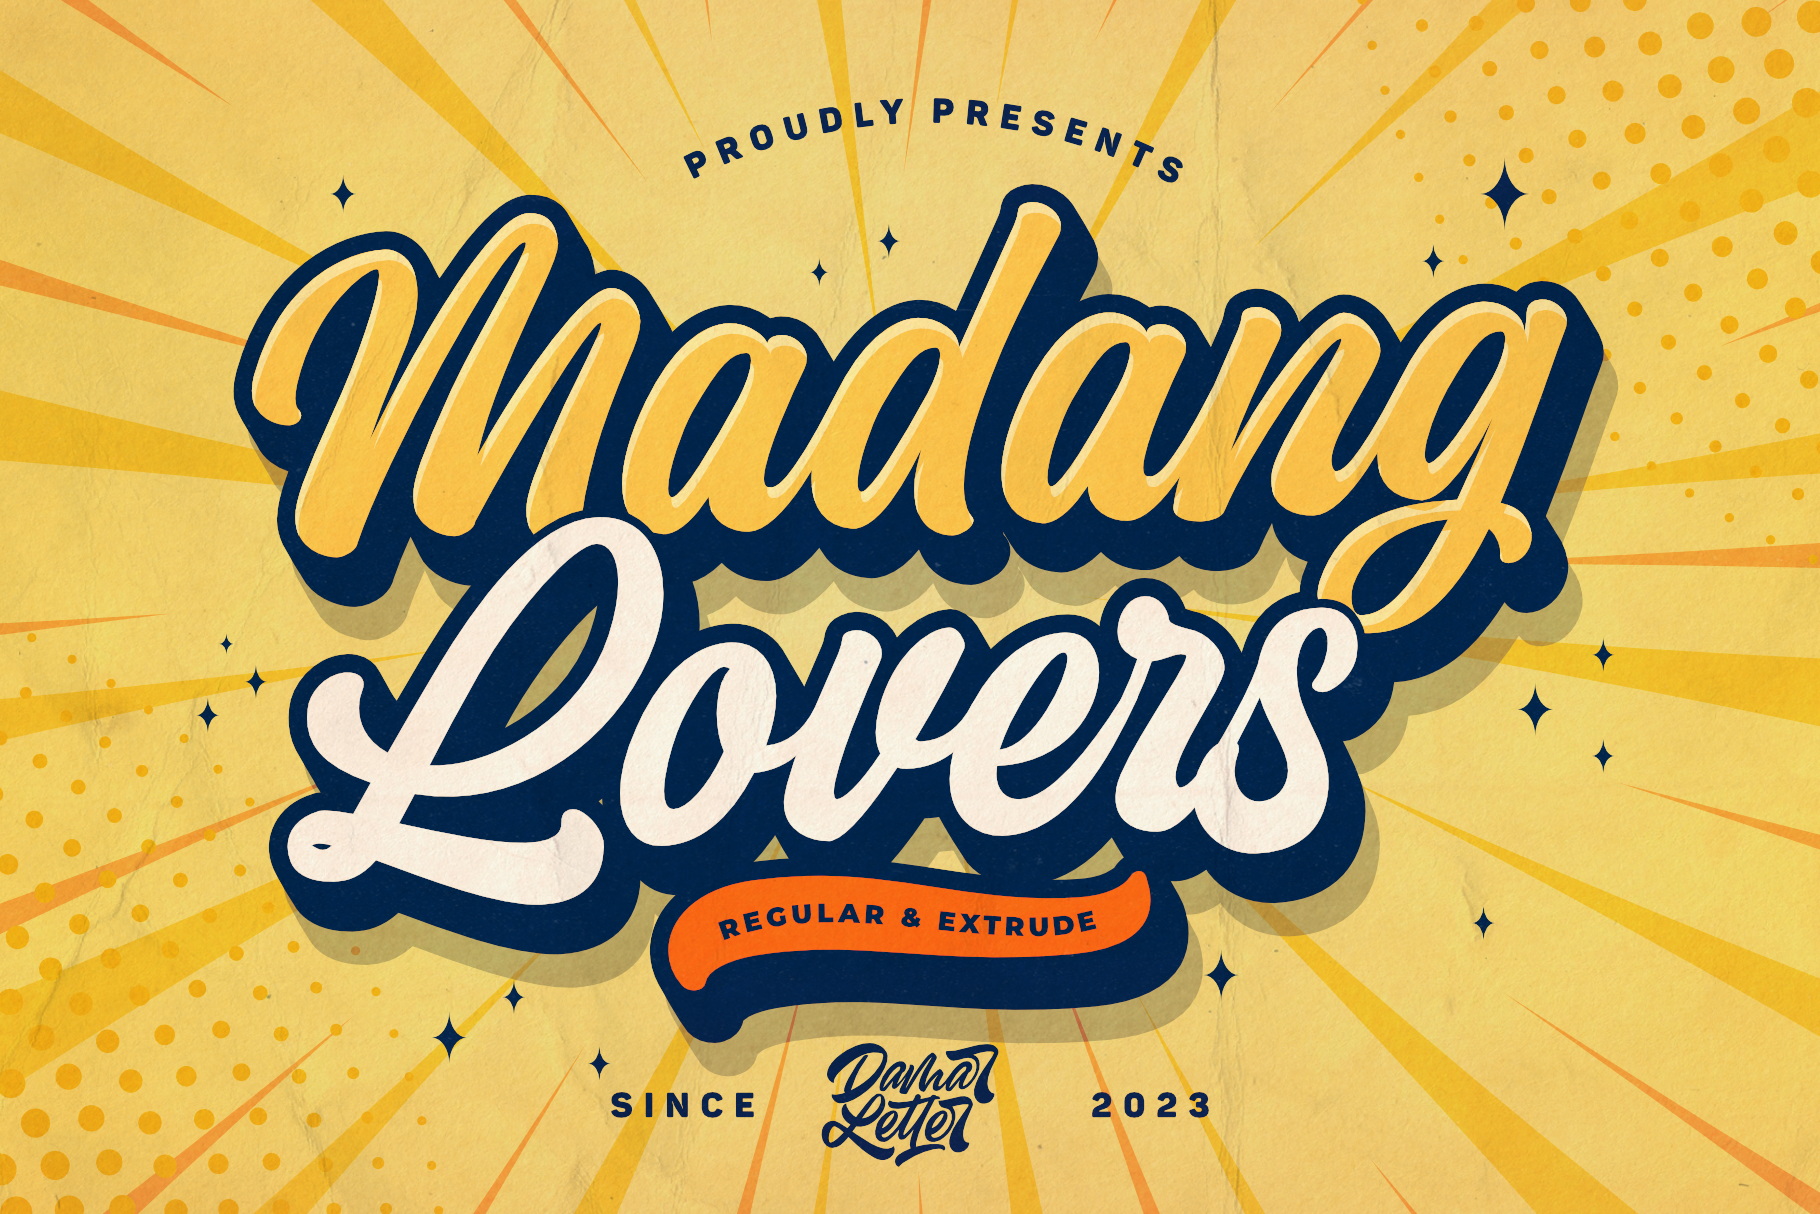 Madang Lovers extrude